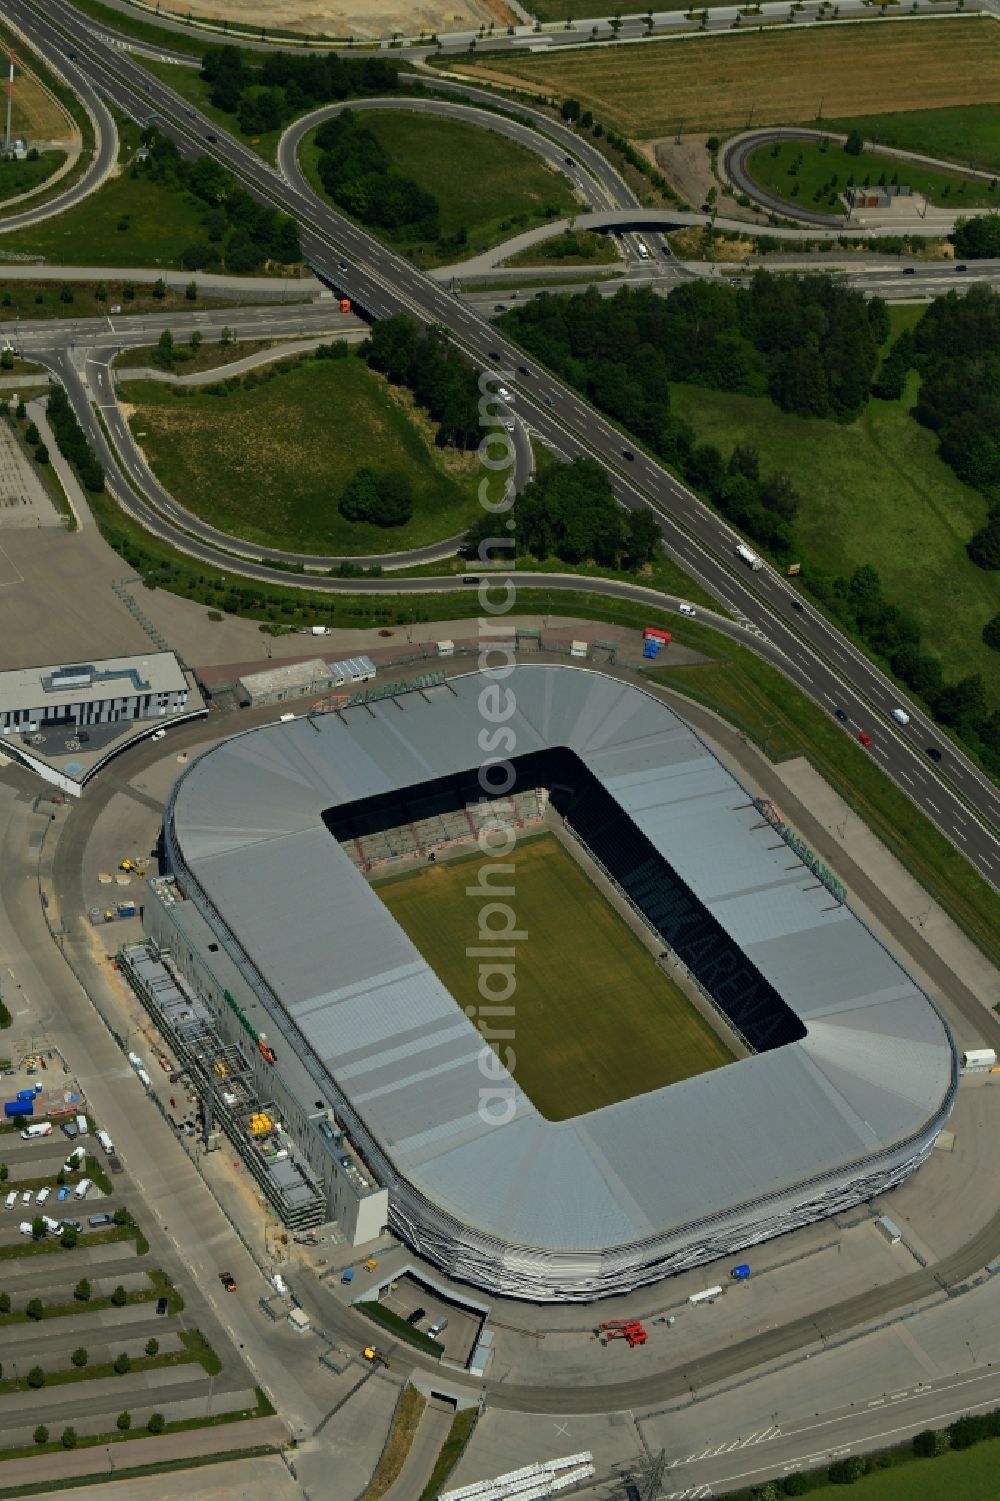 Aerial photograph Augsburg - Extension and conversion site on the sports ground of the stadium WWK Arena of FC Augsburg on Buergermeister-Ulrich-Strasse in Augsburg in the state Bavaria, Germany